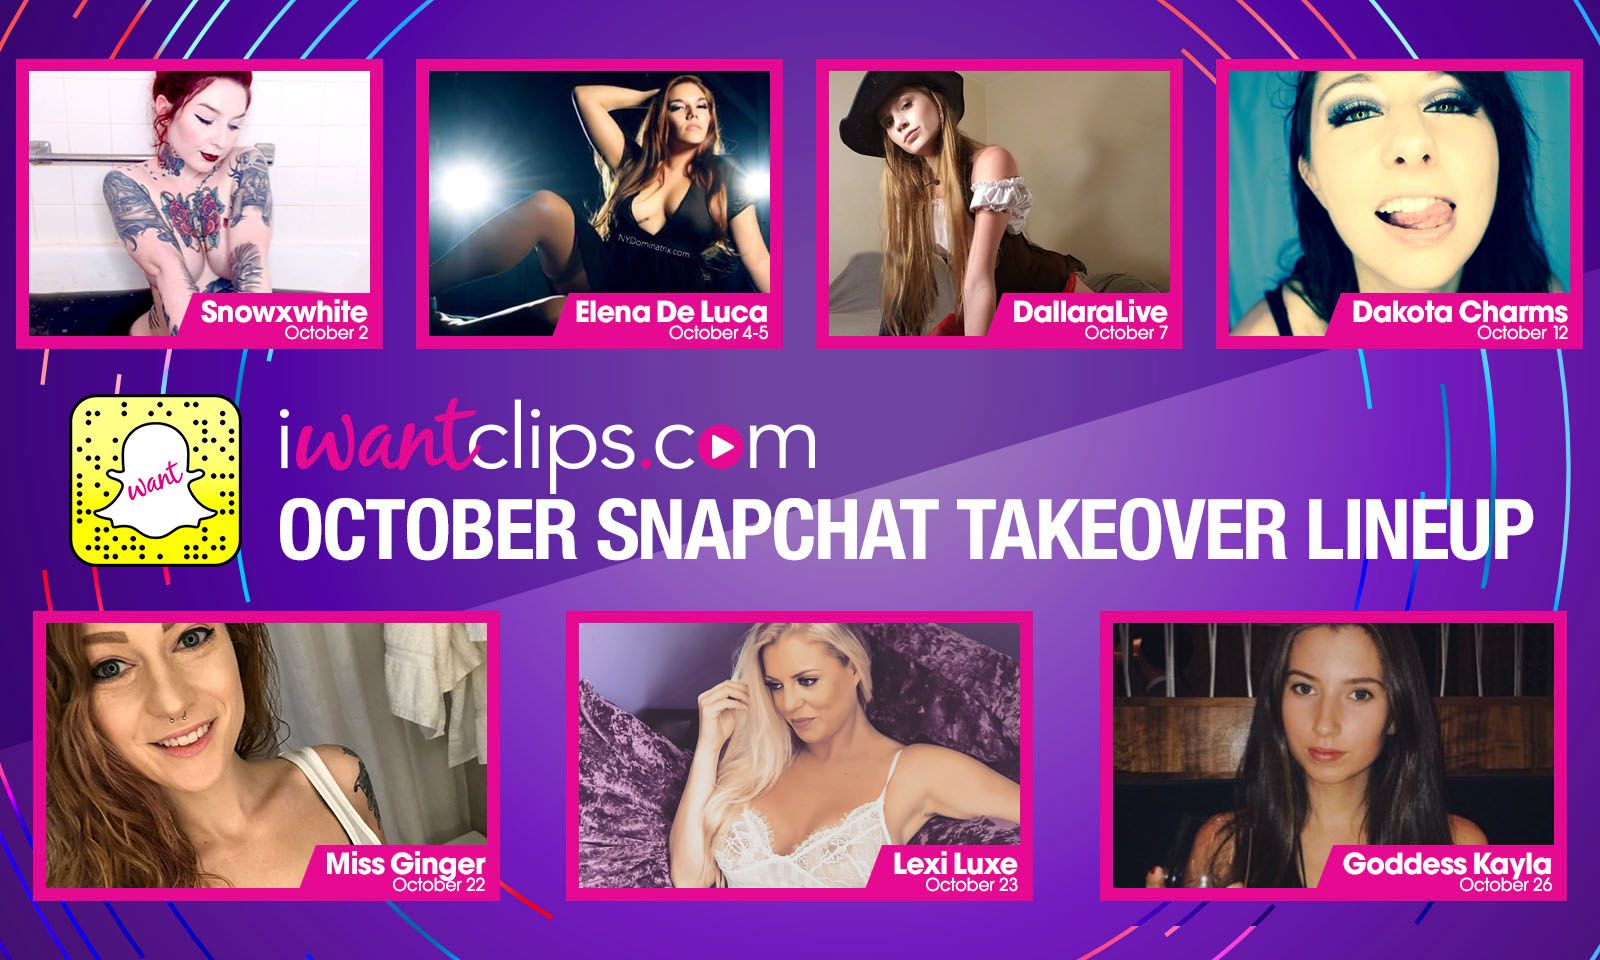 iWantClips Announces October Snapchat Takeovers